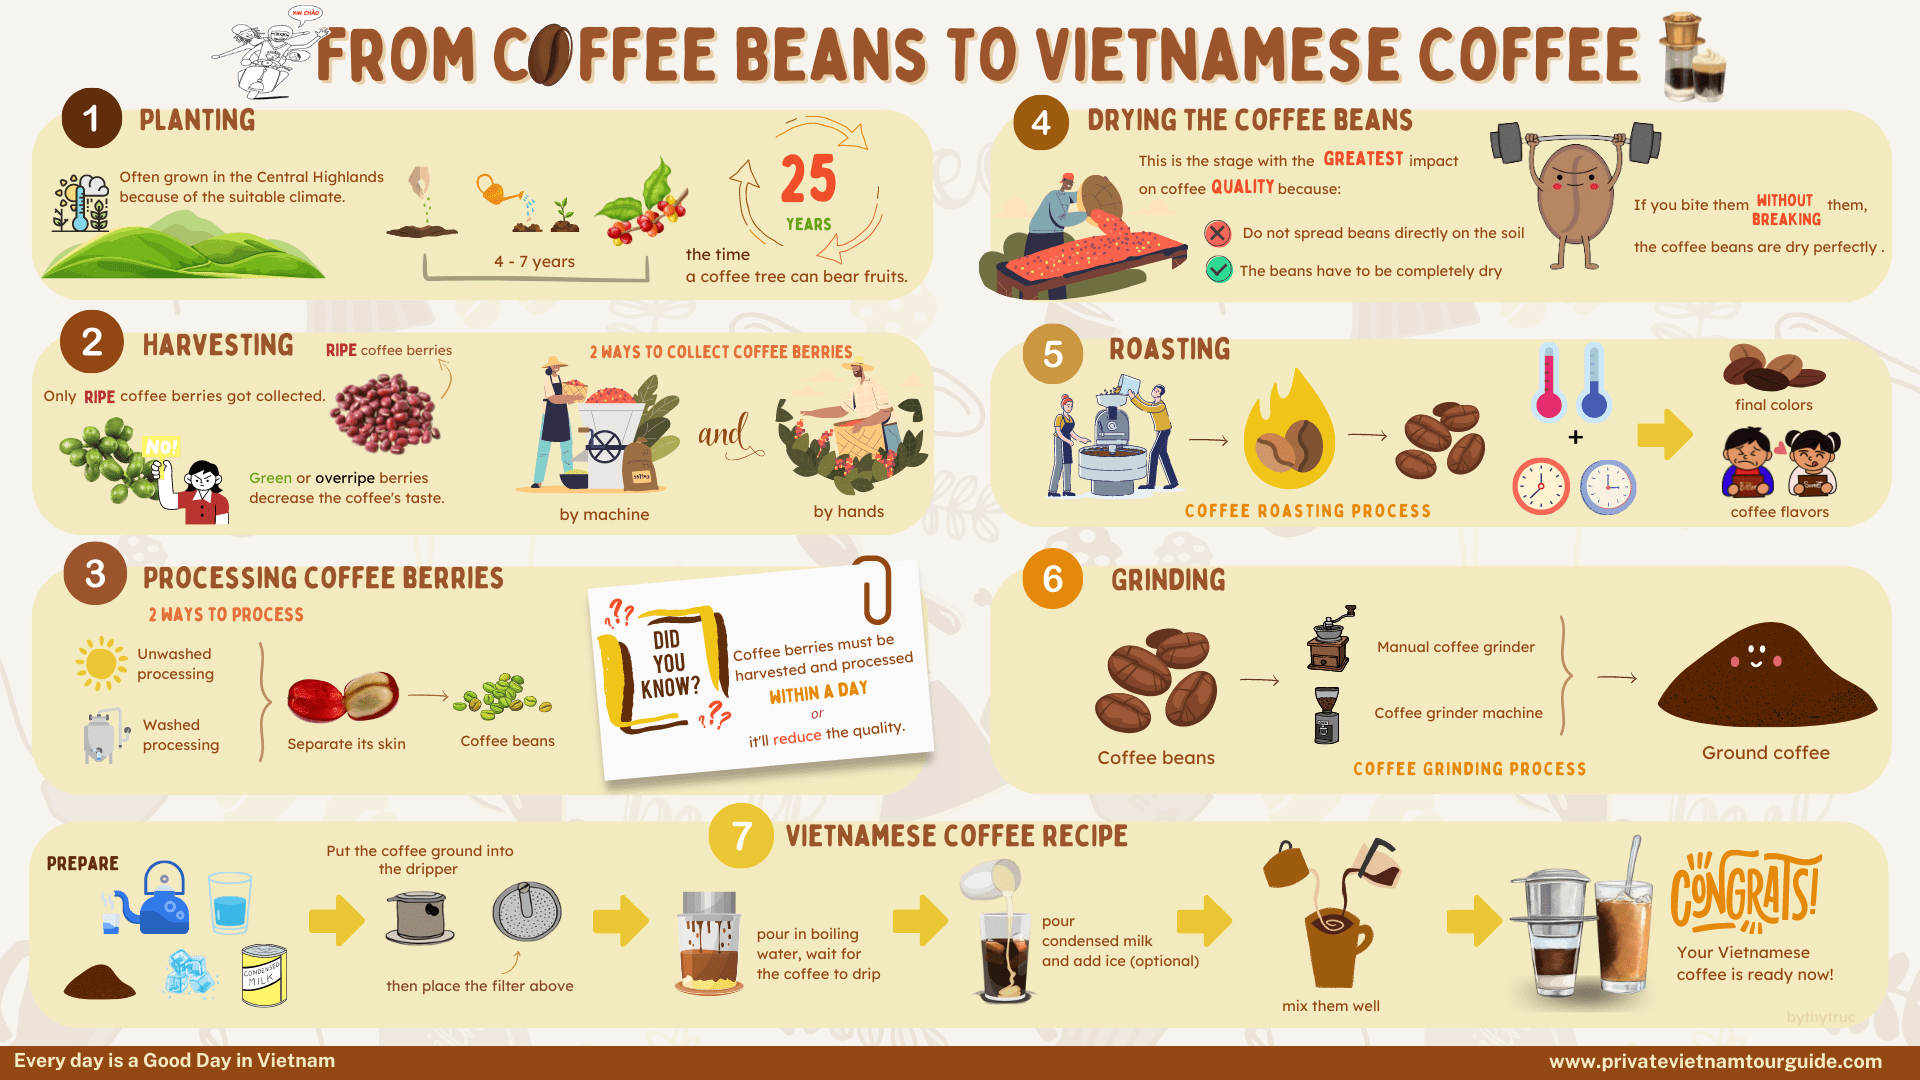 howtomakevietnamesecoffee